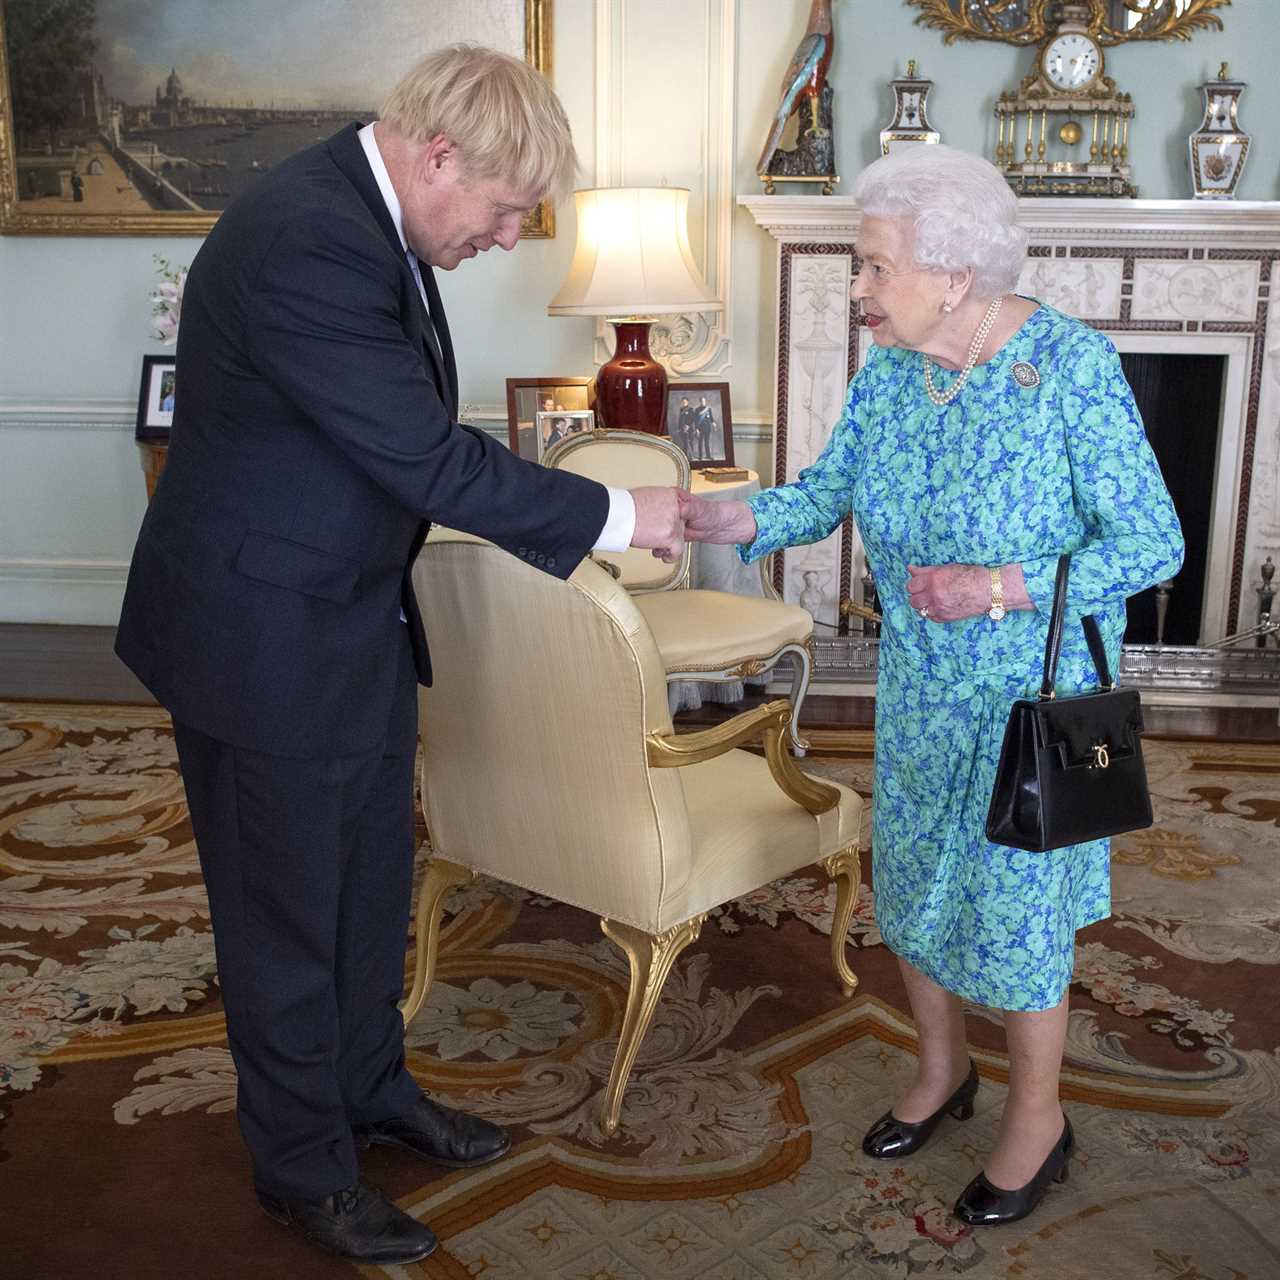 Boris Johnson calls Queen to tell her he will RESIGN in 12pm statement after resignation bloodbath